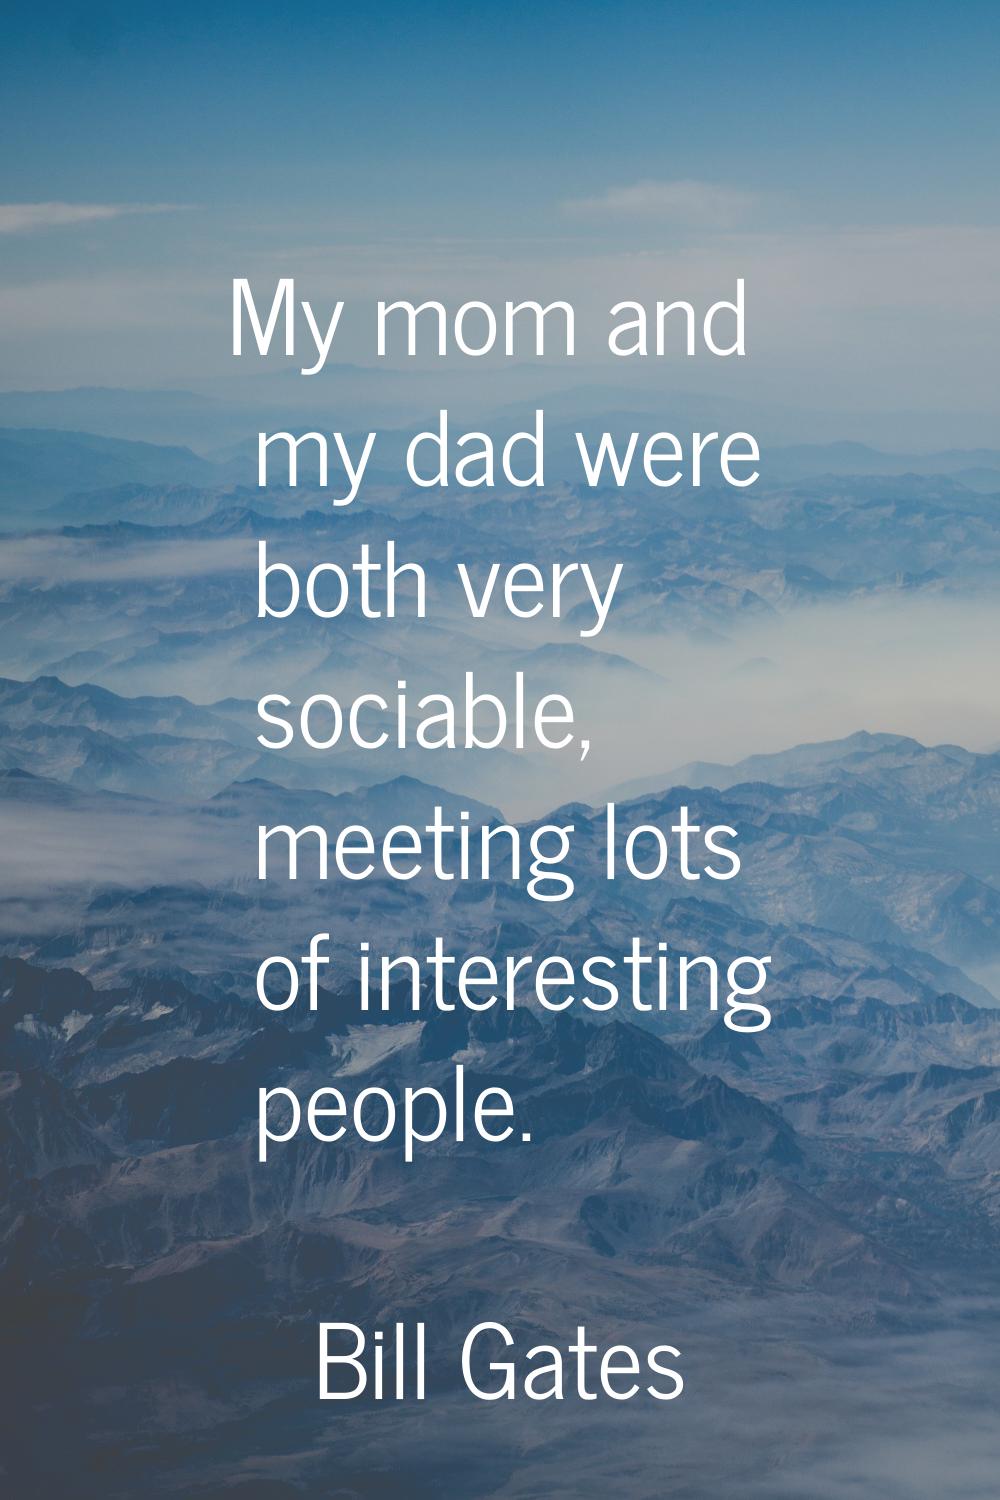 My mom and my dad were both very sociable, meeting lots of interesting people.